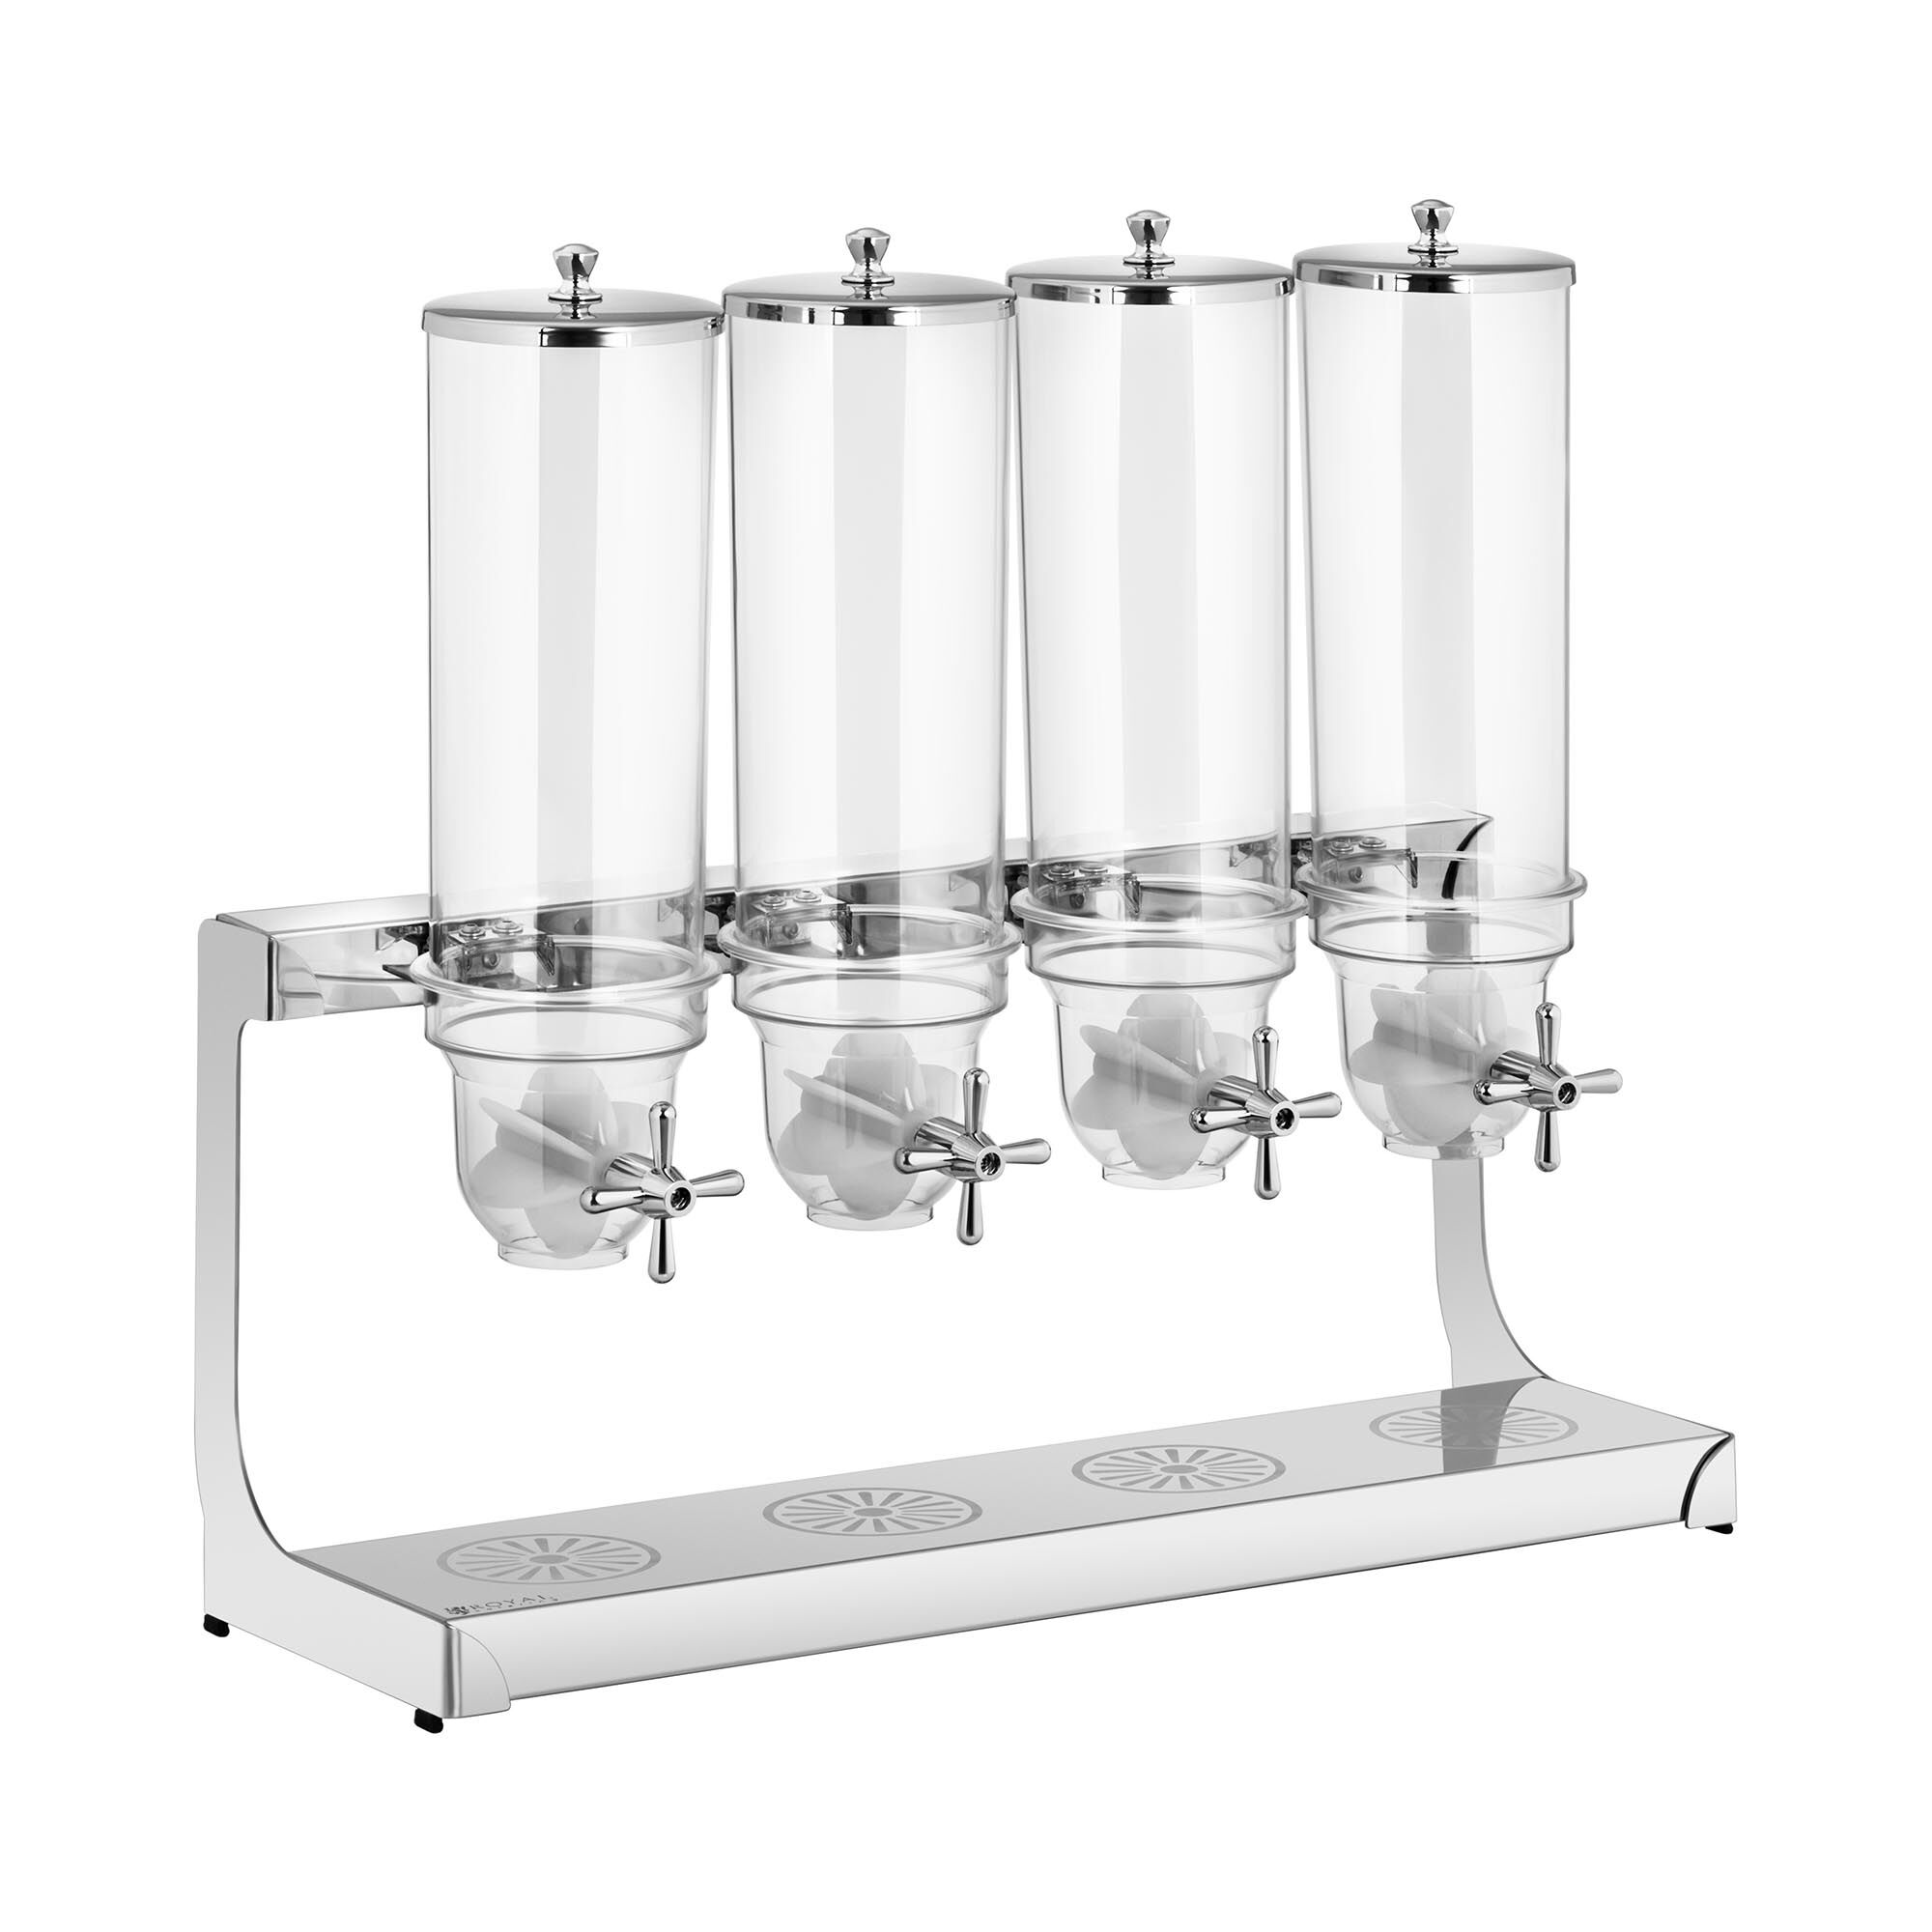 Royal Catering Granen Dispenser - 4 x 3.5 L - 4 containers RCCS-3.5LSS4